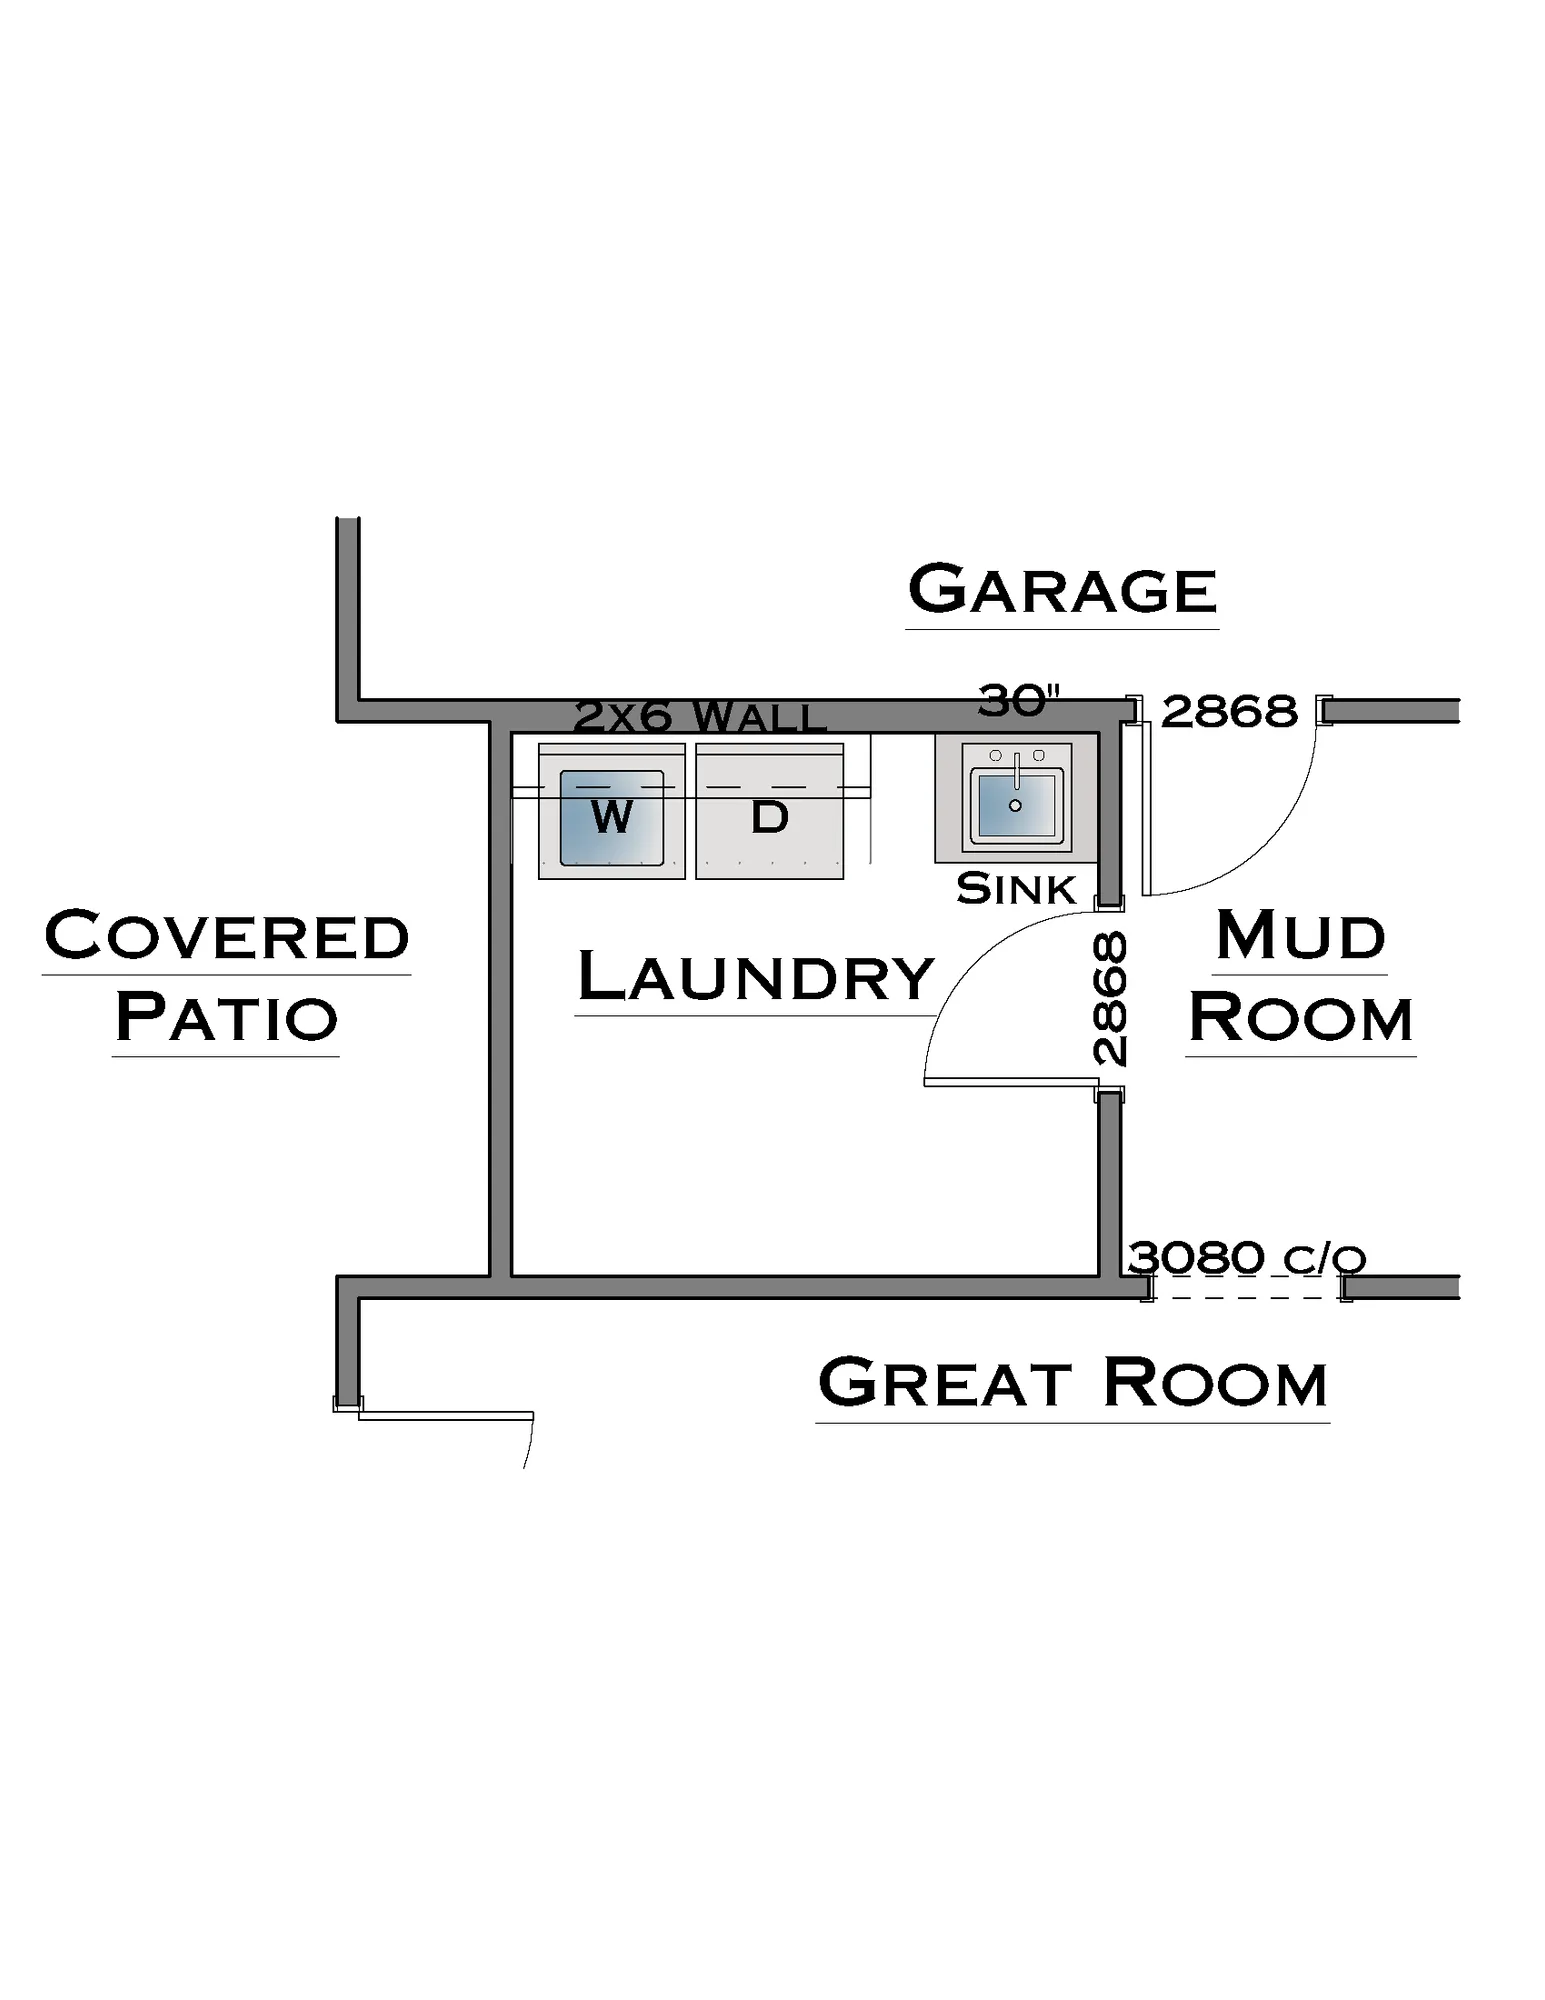 Laundry Room Sink Option - undefined